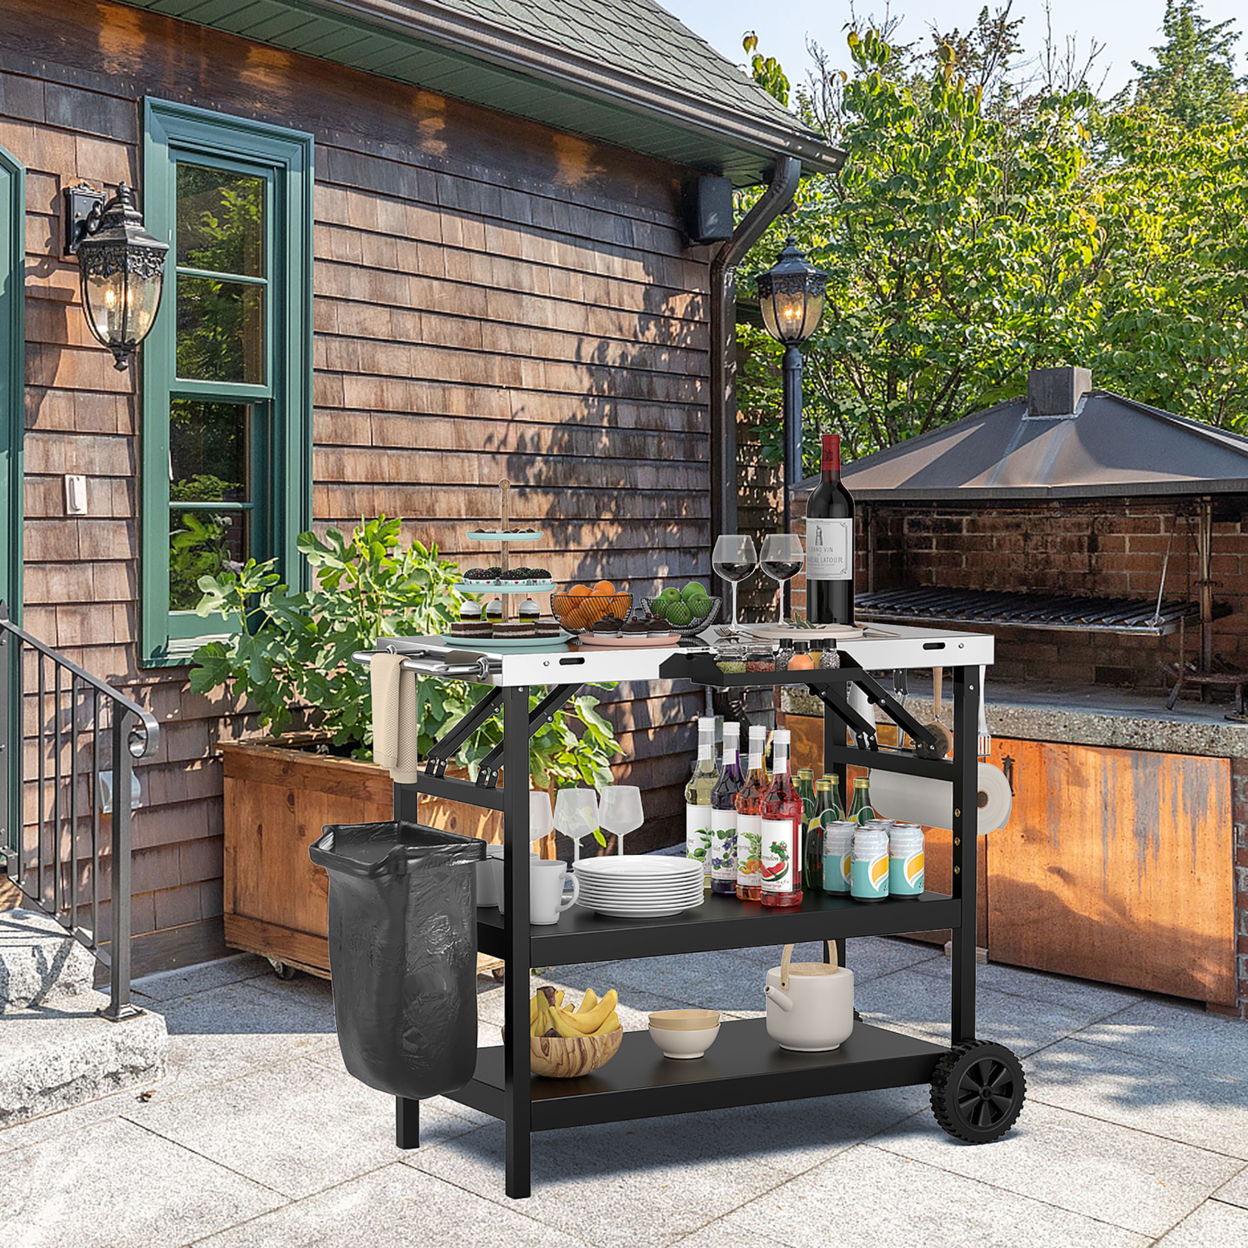 3-Shelf Movable Grill Cart Table Home & Outdoor Multifunctional Stainless Steel